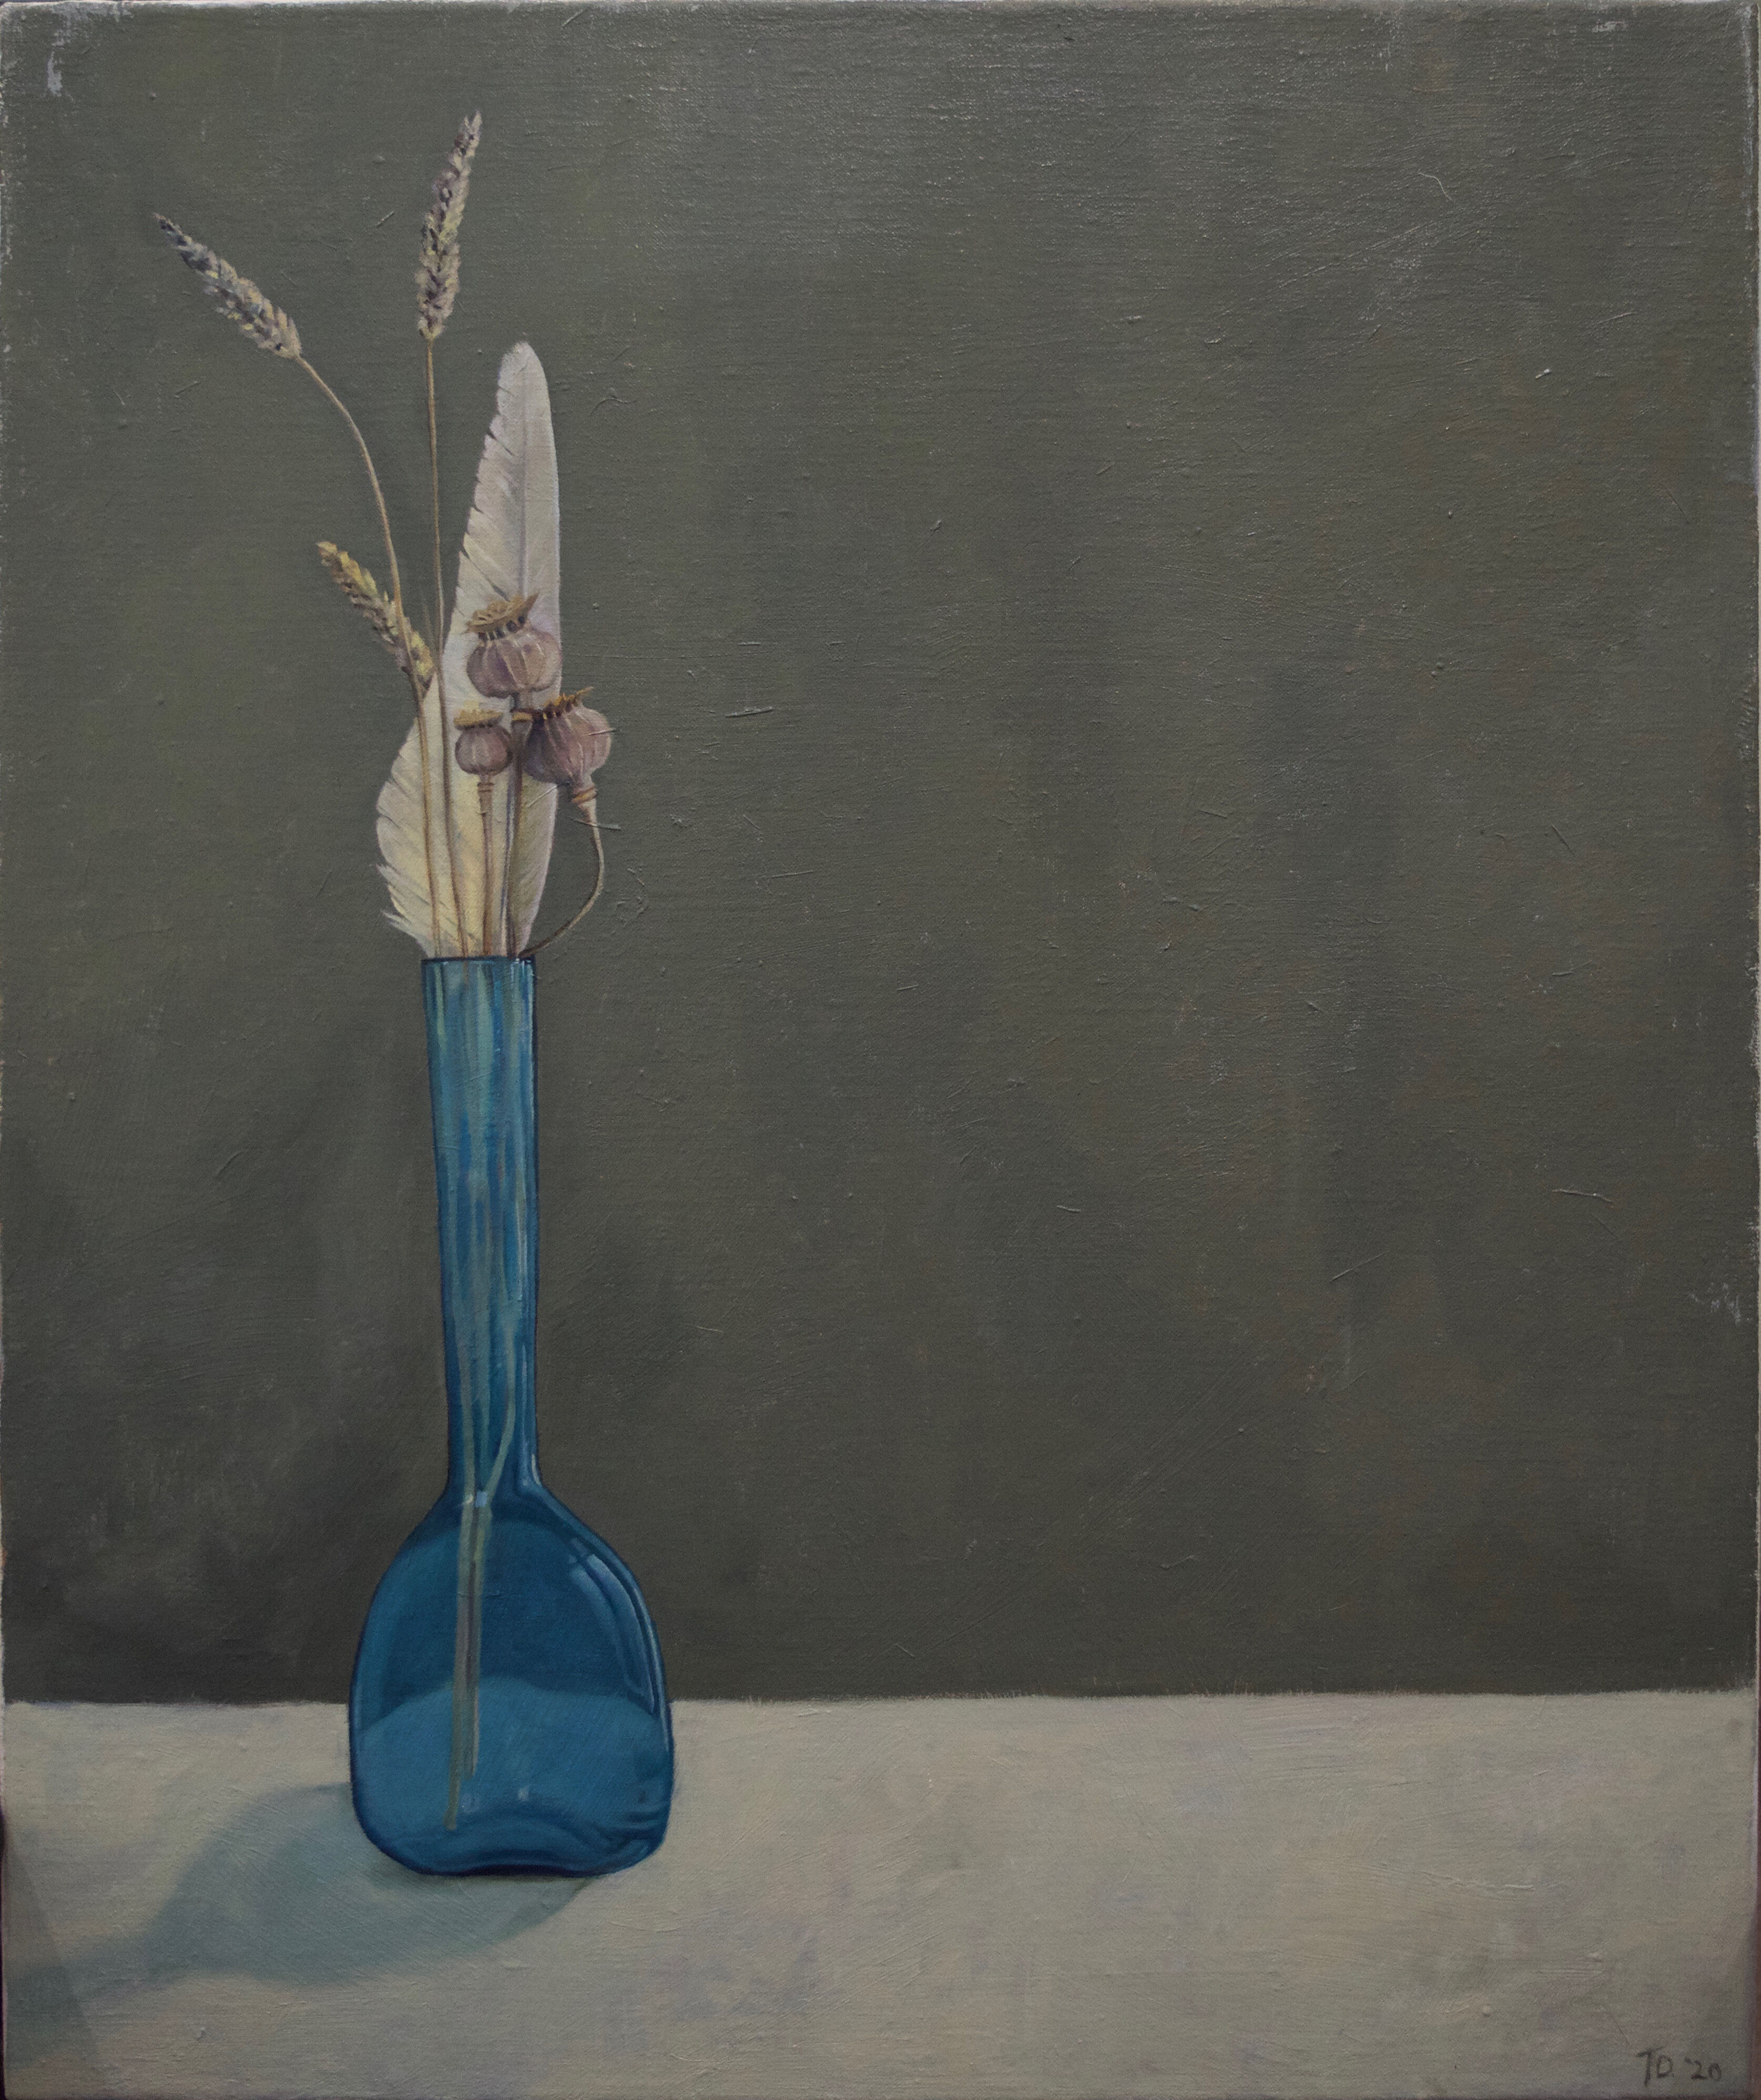 a painting by Tenar Dwyer titled SELF CONTAINED a realistic painting of a blue glass vase with a white feather and plant stems on a grey background